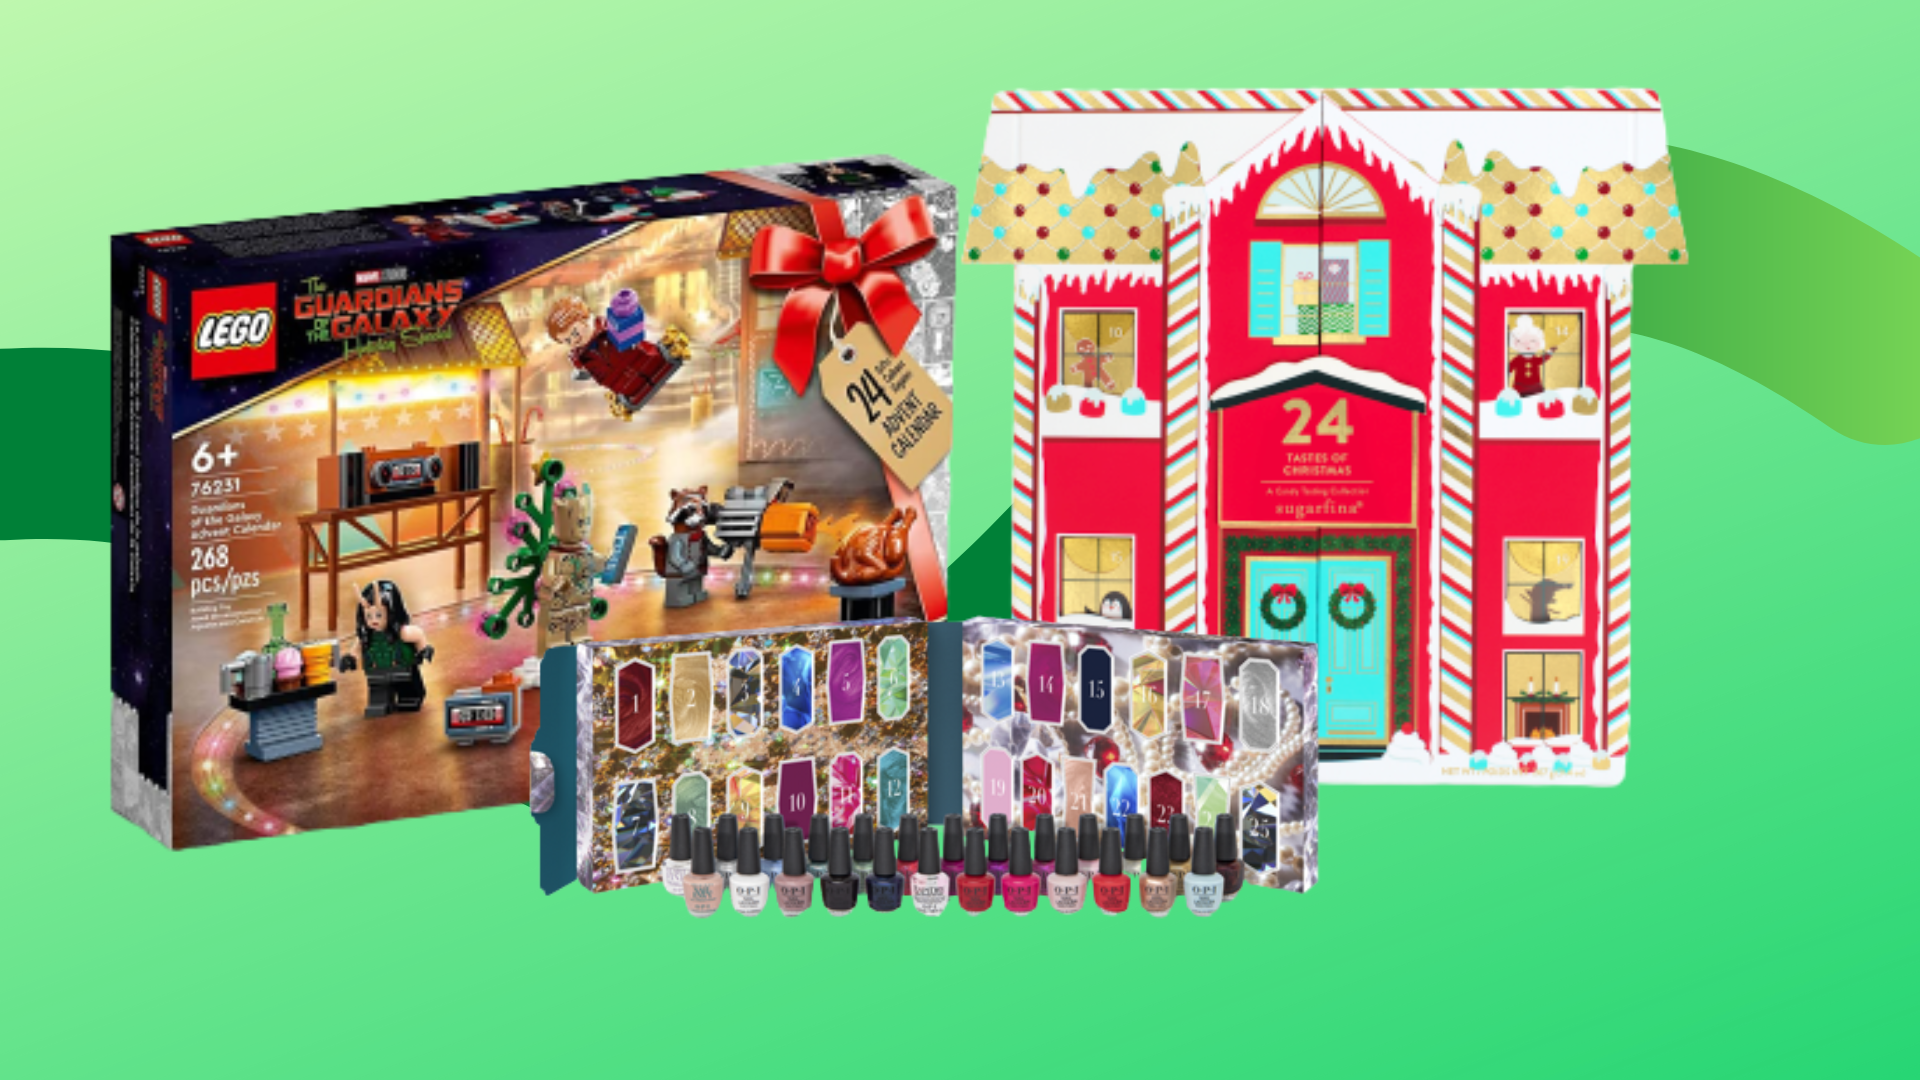 Count down to the holidays with Black Friday deals on Advent calendars